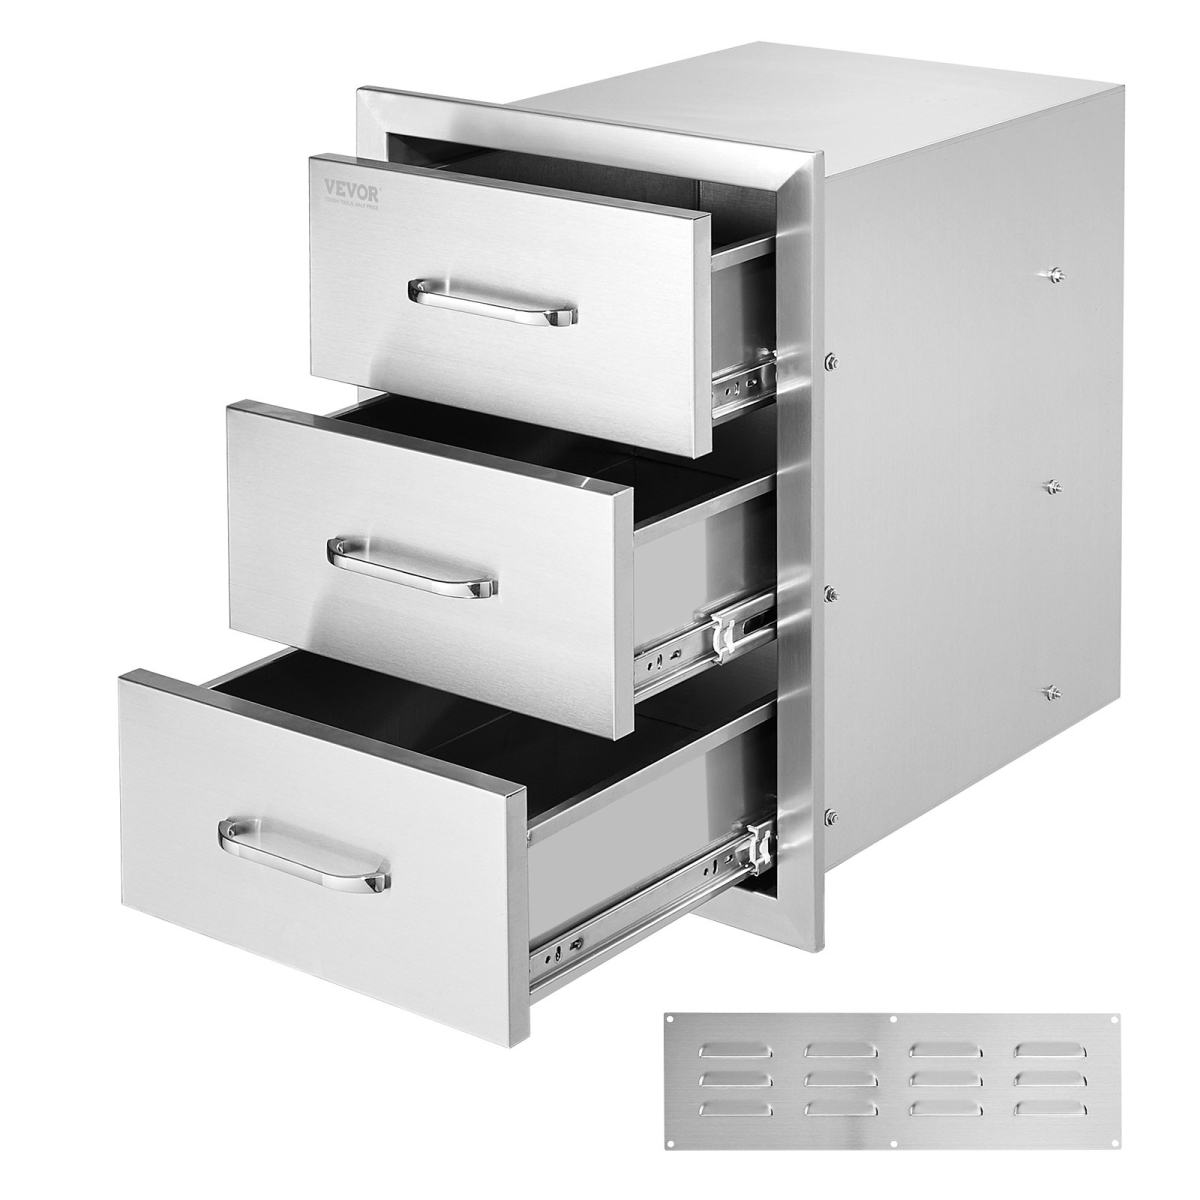 Picture of Vevor CTG16X22.3X180001V0 15.7 x 17.7 x 21.6 in. Chest of Drawers Stainless Steel 201